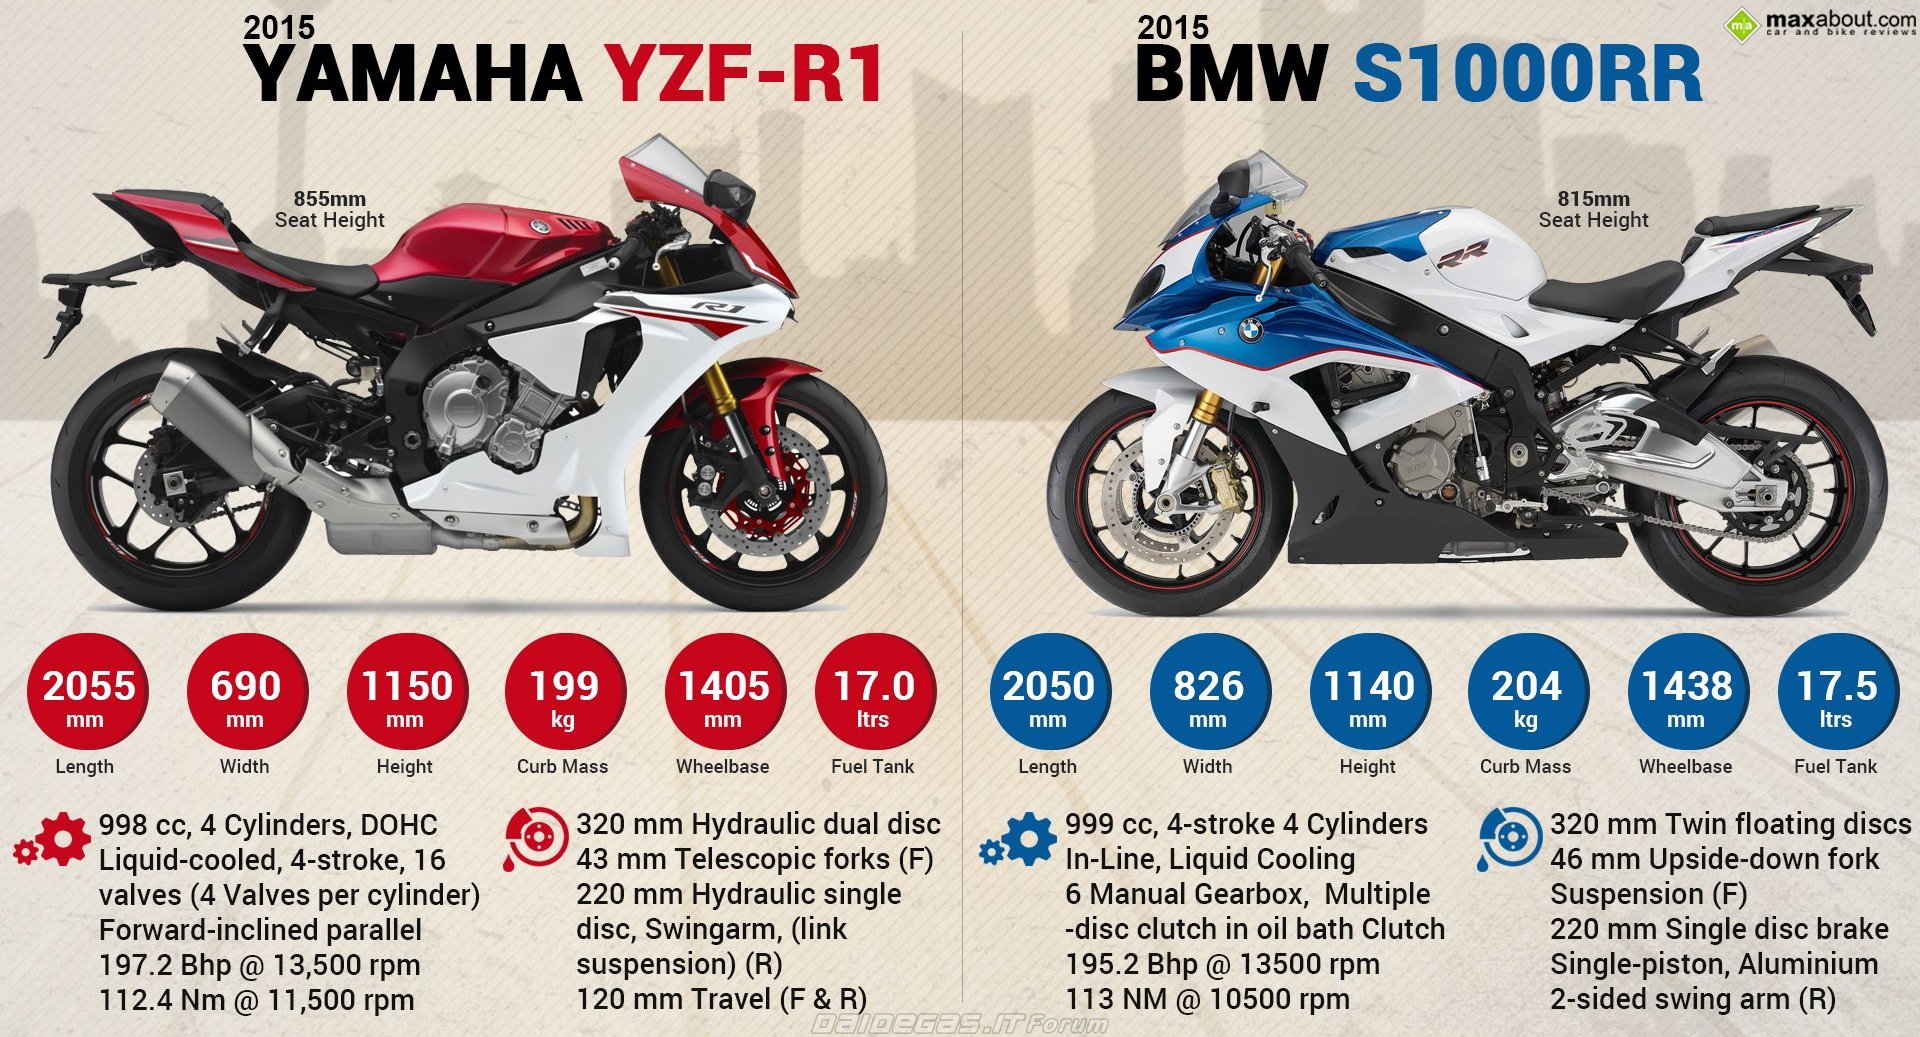 2015 S1000rr Vs 2015 R1 | Motorcycle Review and Galleries